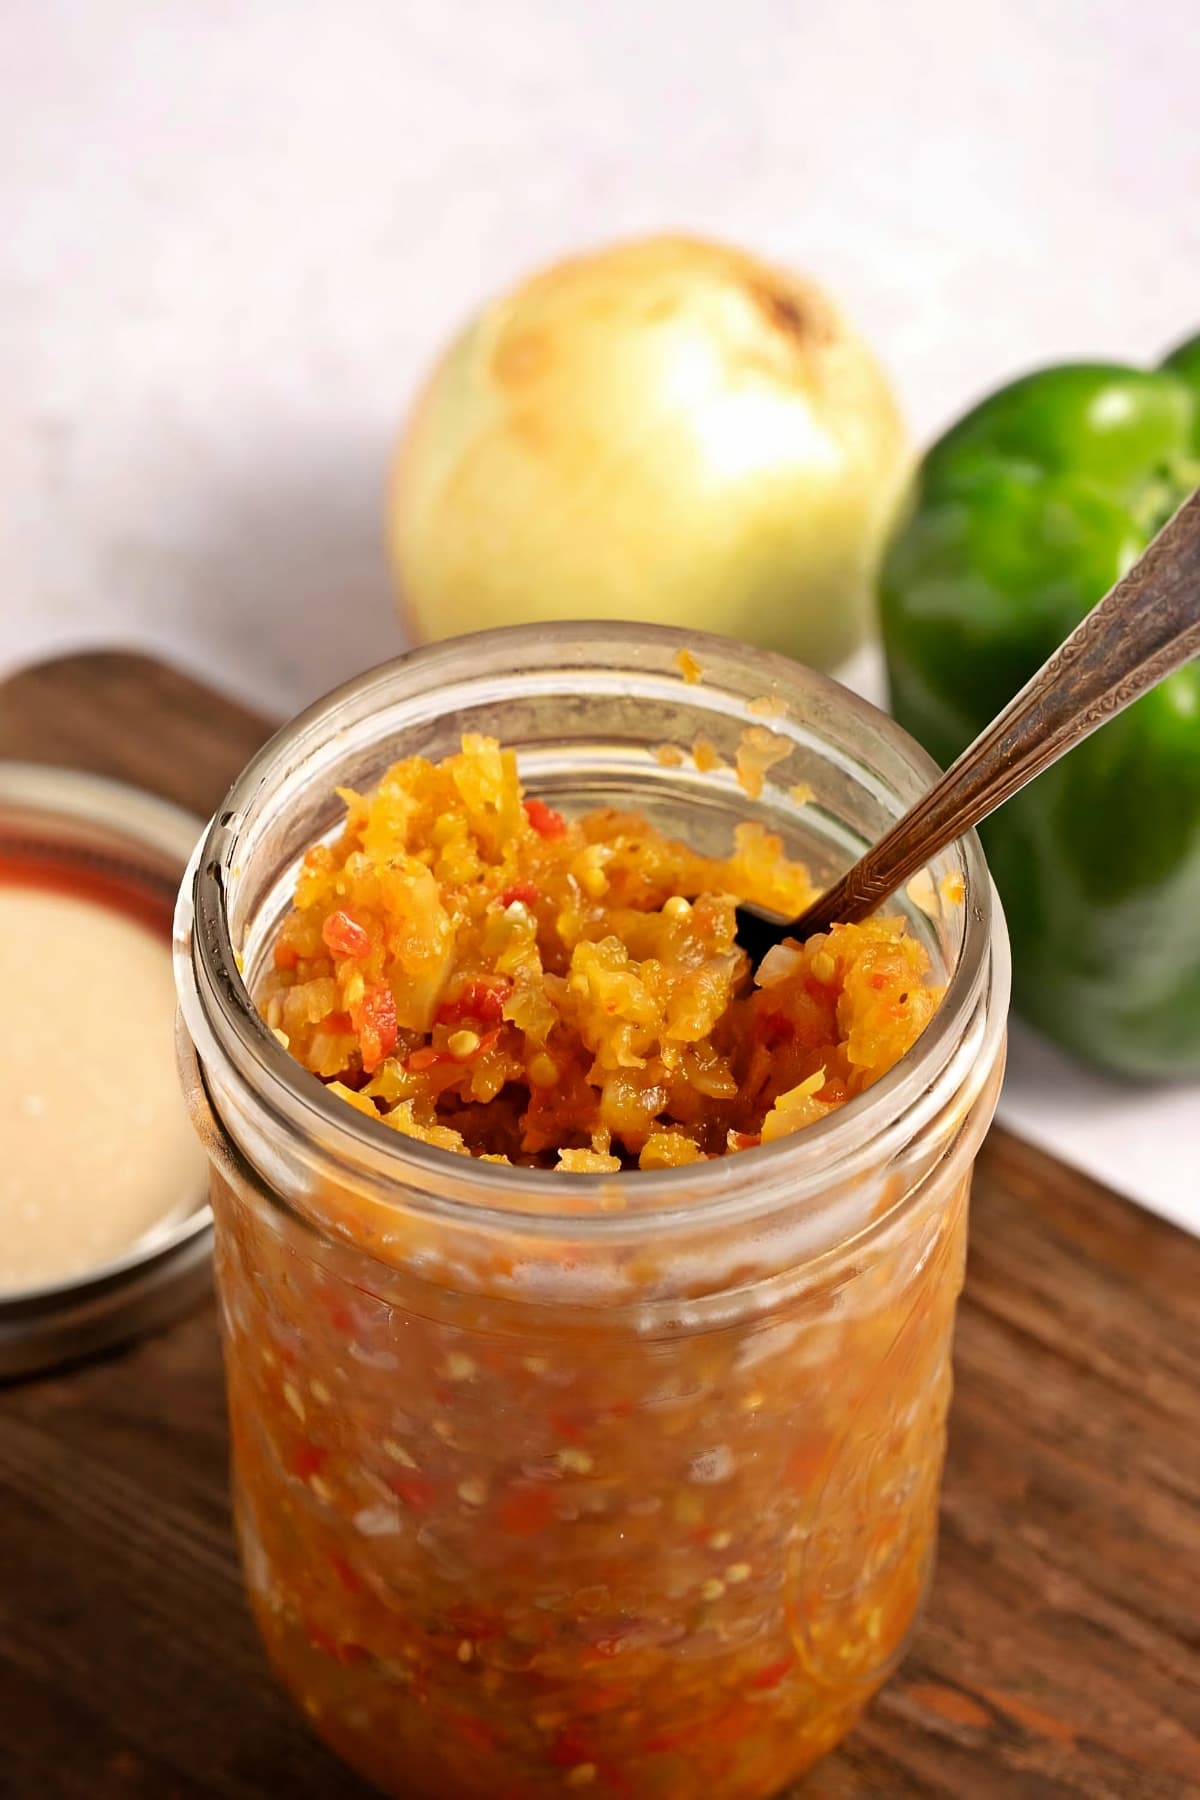 A Mason Jar of Sweet and Tangy Homemade Green Tomato Relish on a Wooden Cutting Board with Peppers and Onions in the Background